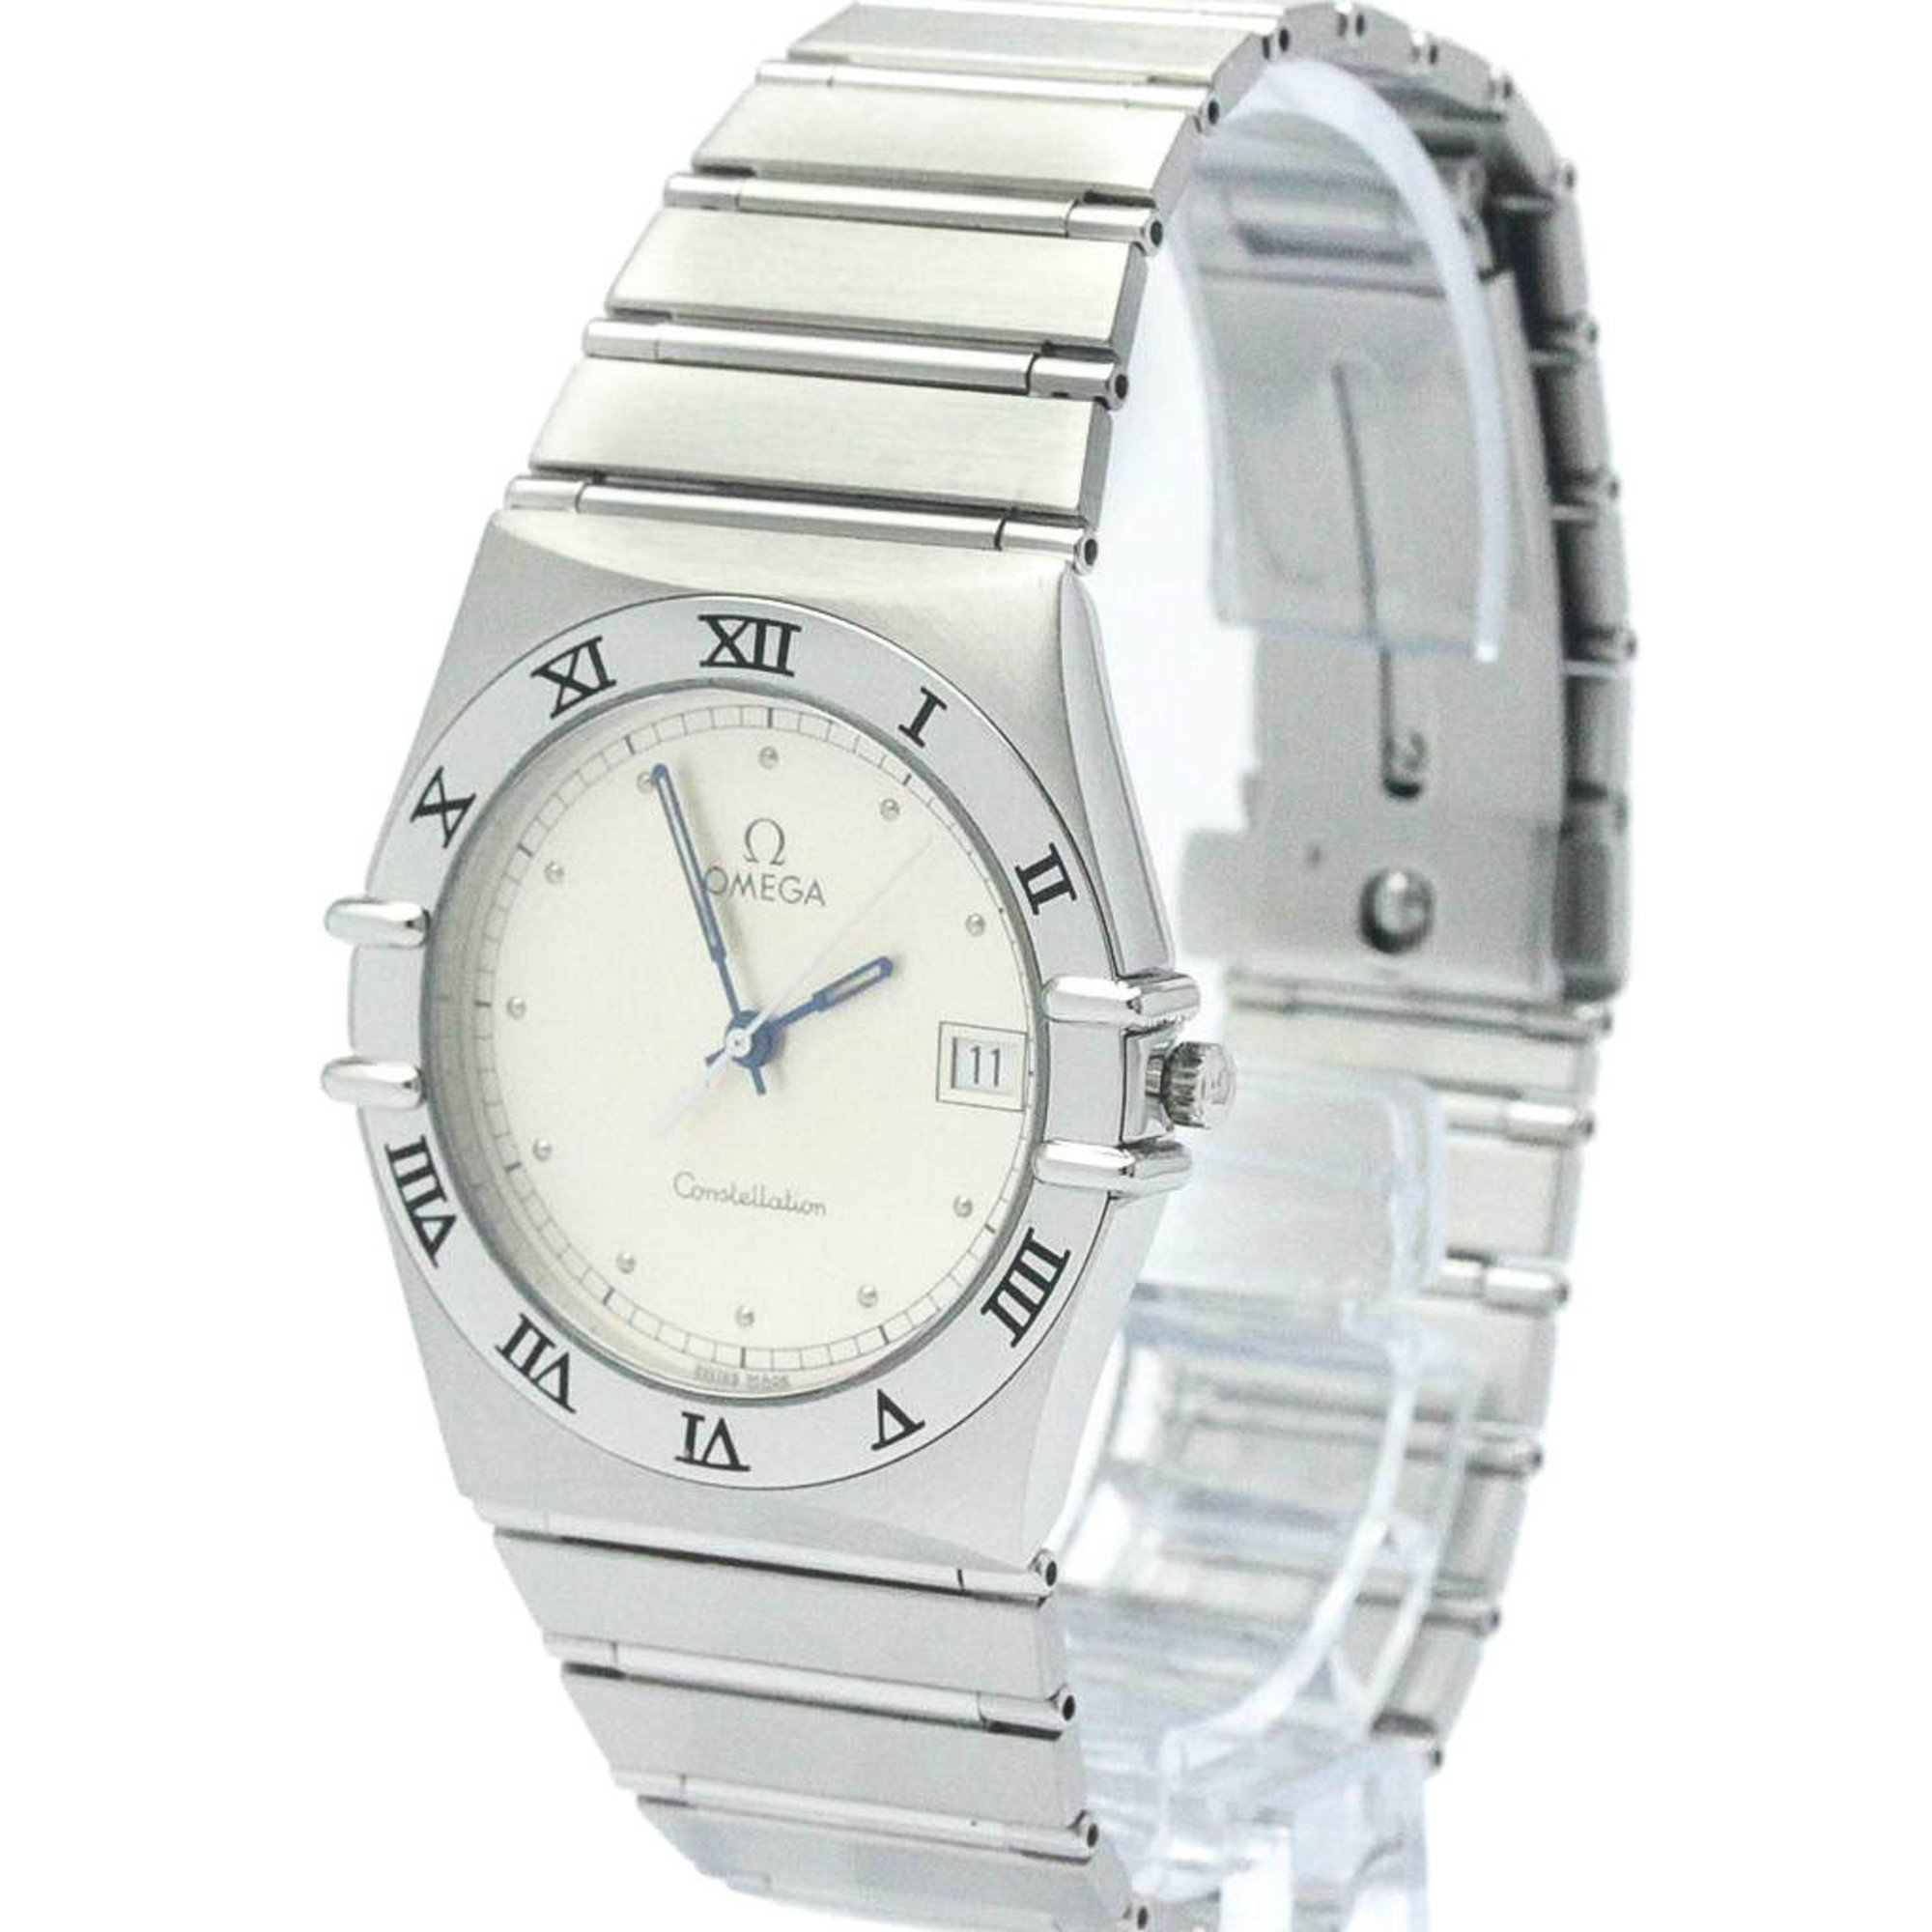 Polished OMEGA Constellation Stainless Steel Quartz Mens Watch 396.1070 BF567941